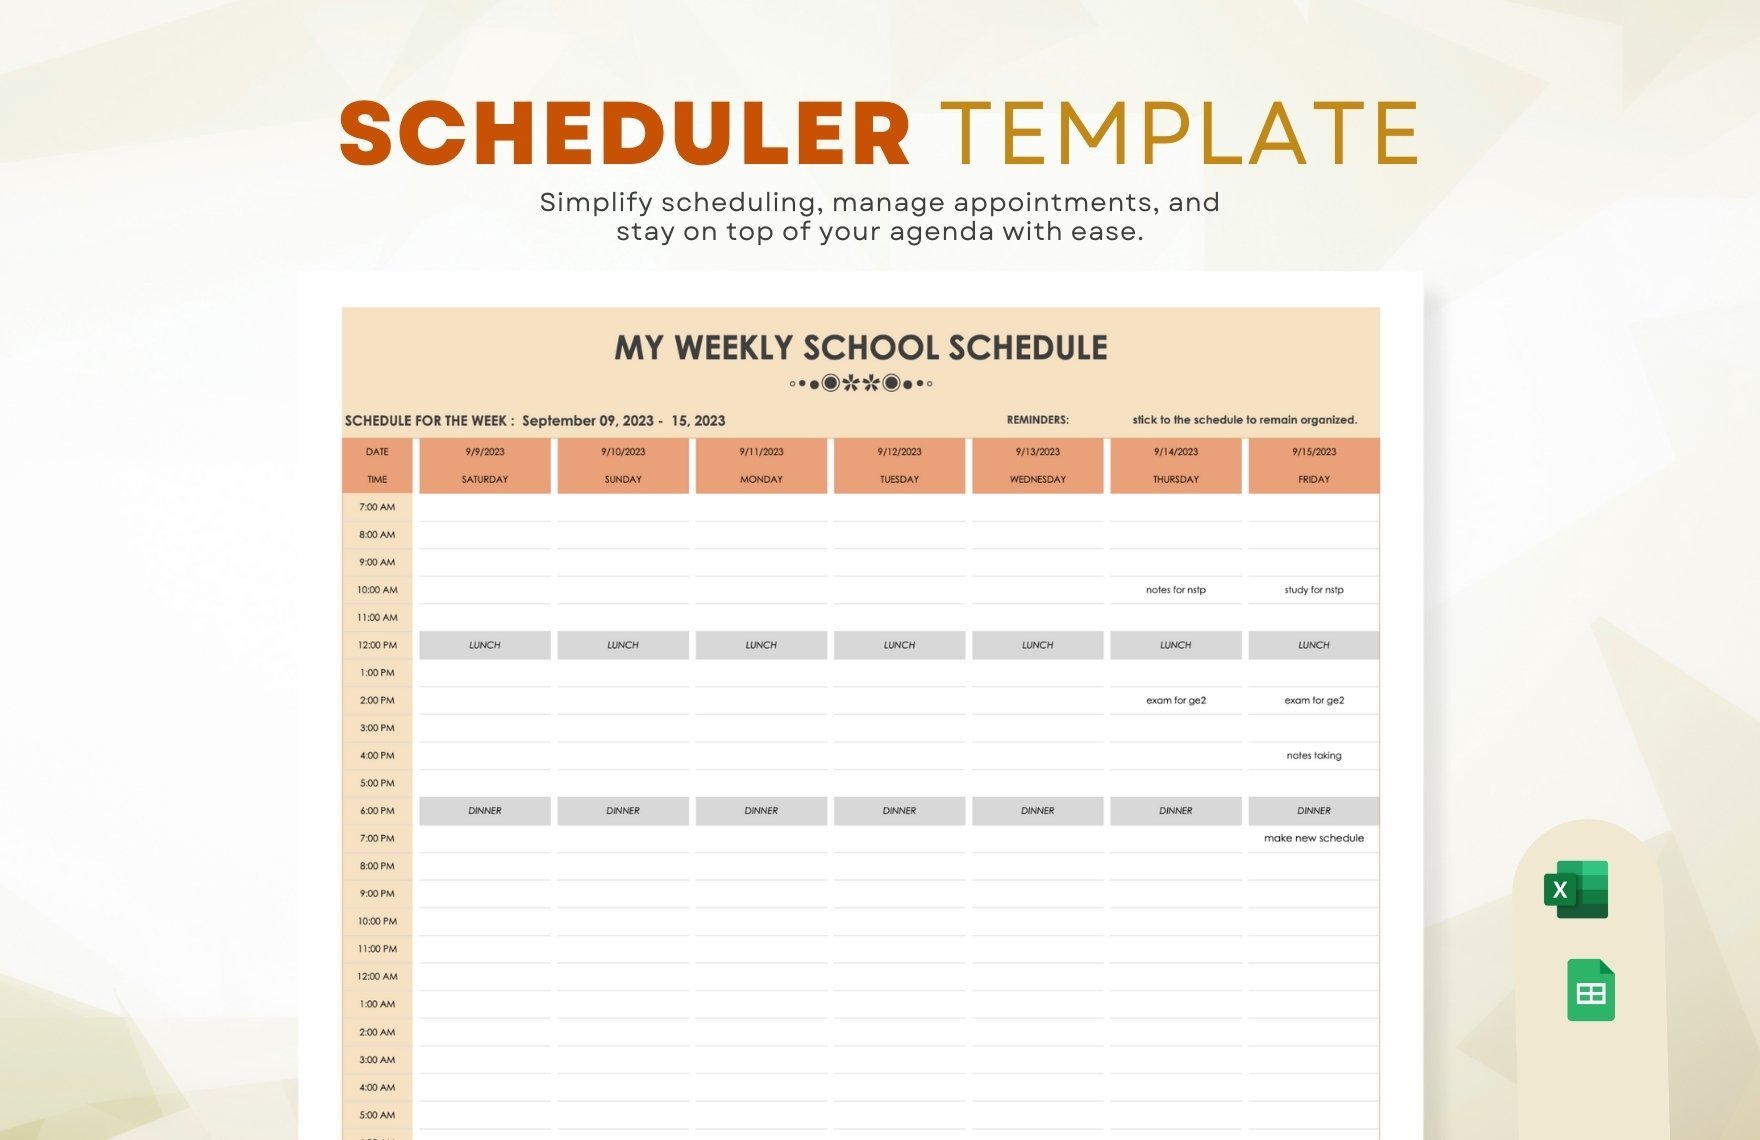 Free Scheduler Template in Excel, Google Sheets